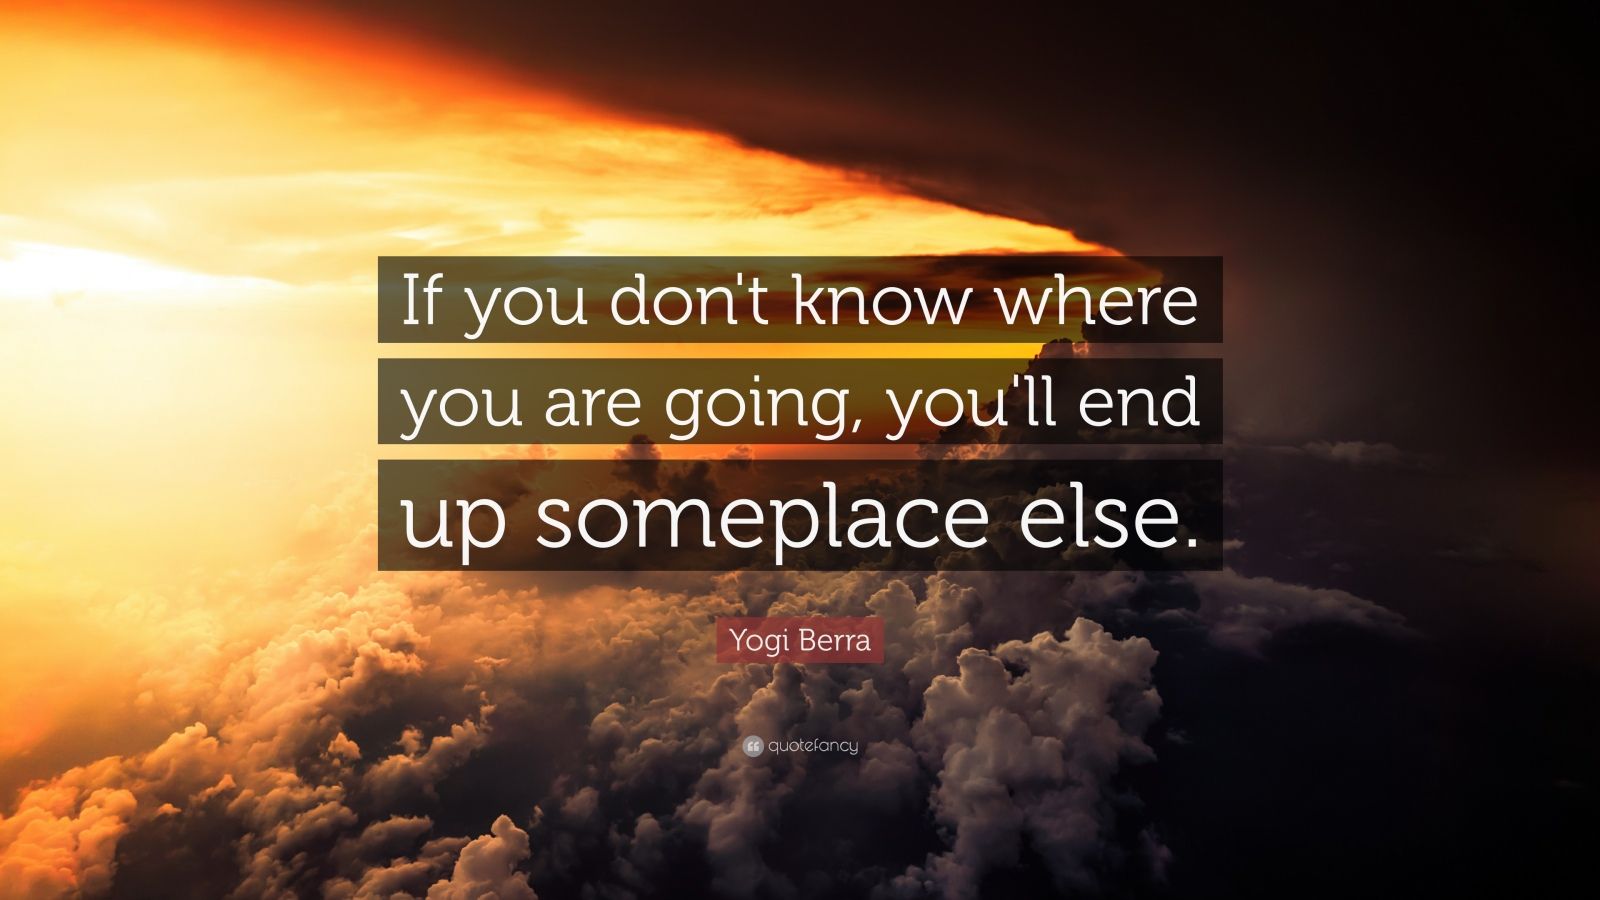 Yogi Berra Quote: "If you don't know where you are going, you'll end up someplace else." (15 ...